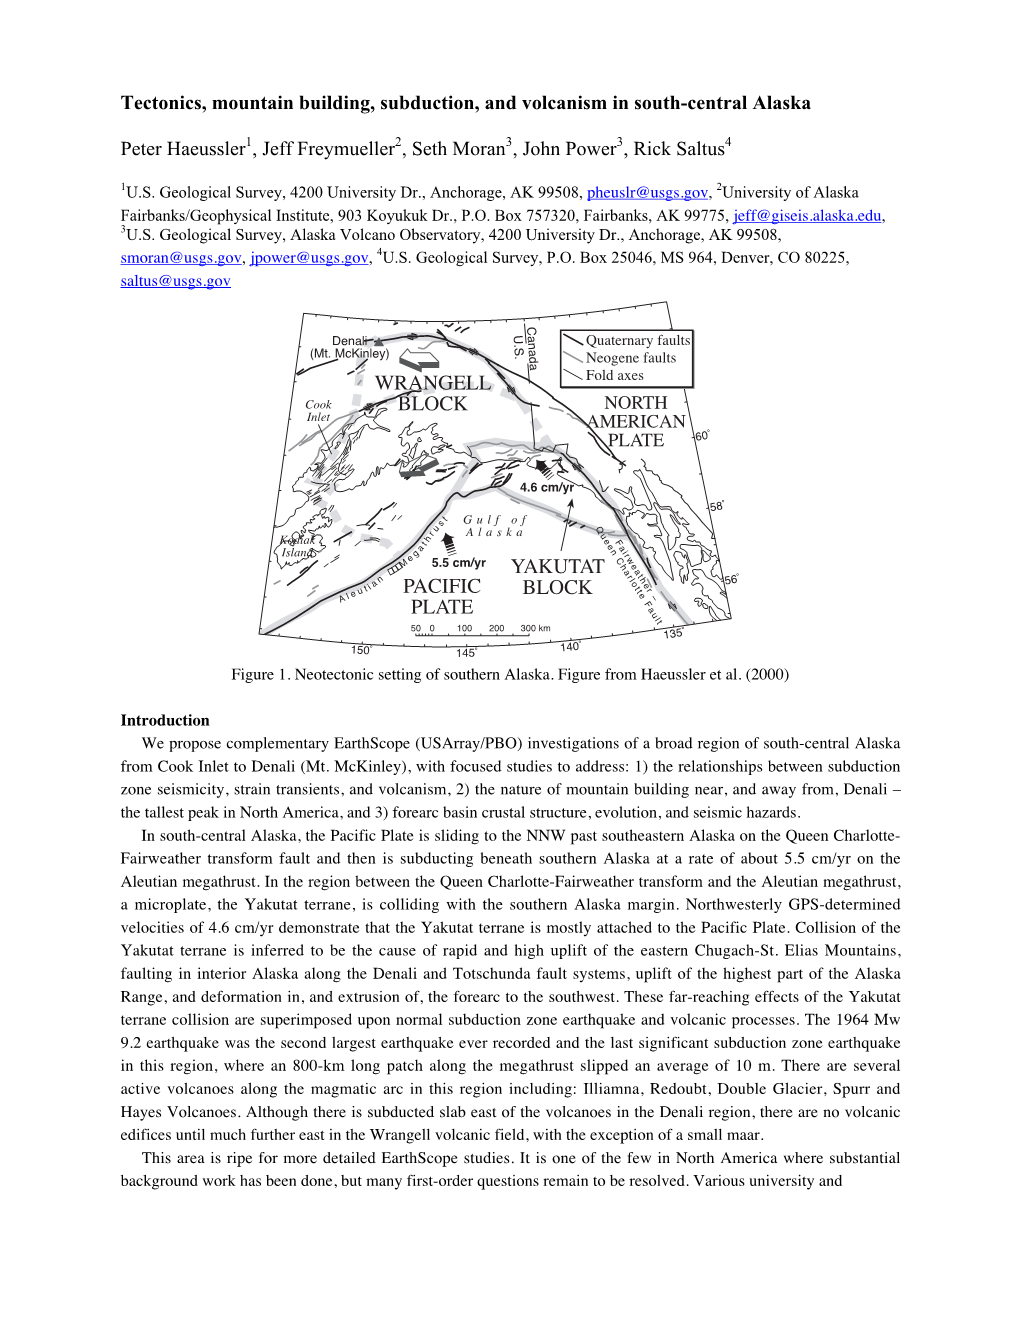 Tectonics, Mountain Building, Subduction, and Volcanism in South-Central Alaska